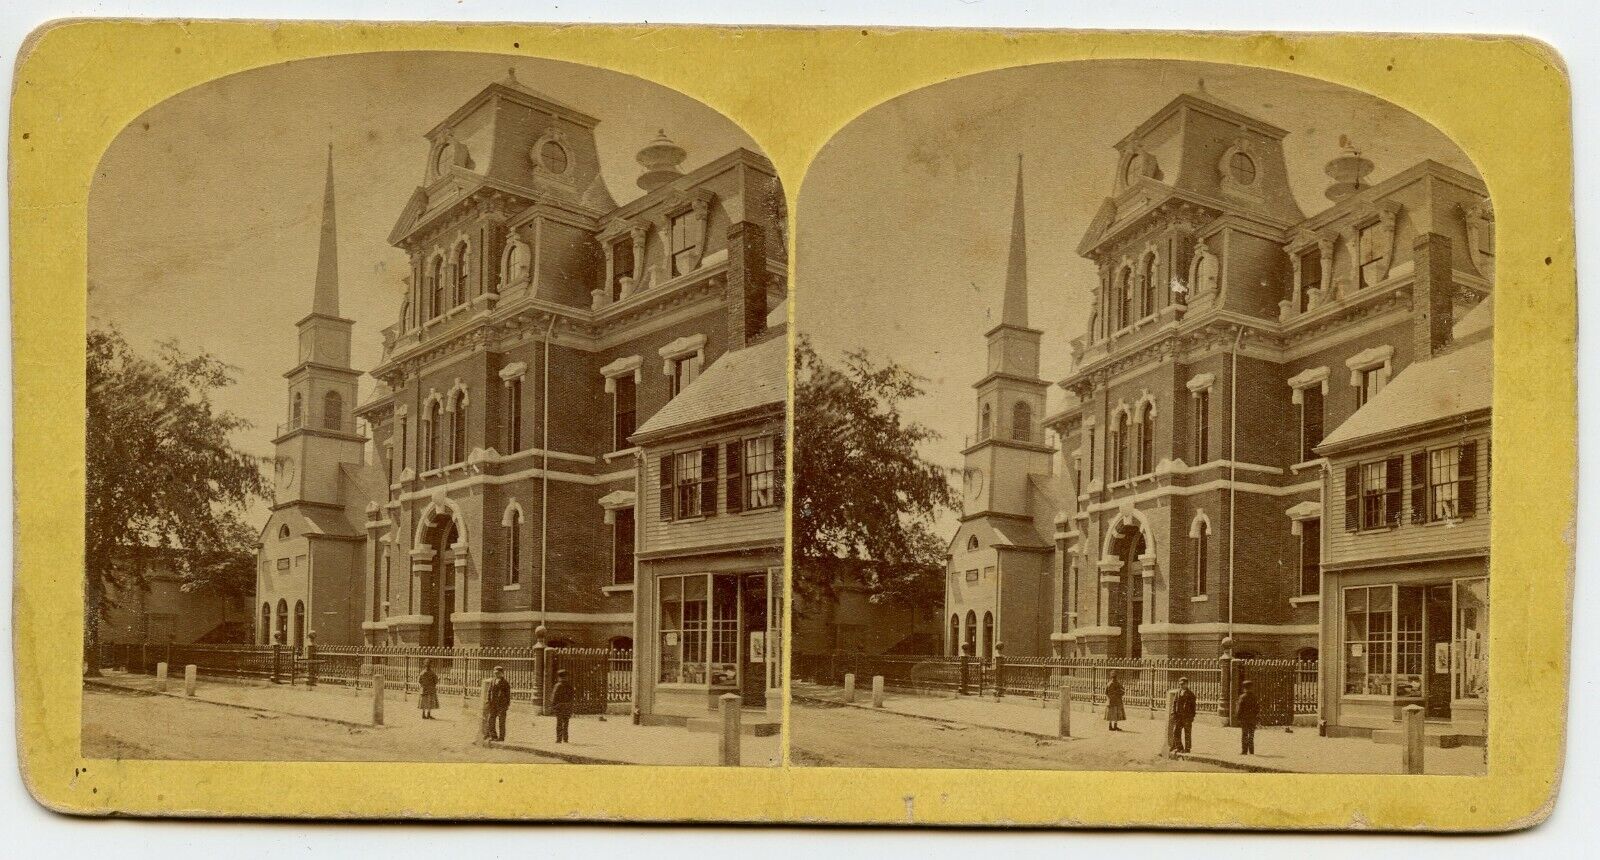 Green School House & Church , Lowell MA Vintage Stereoview Photo by J. Moulton